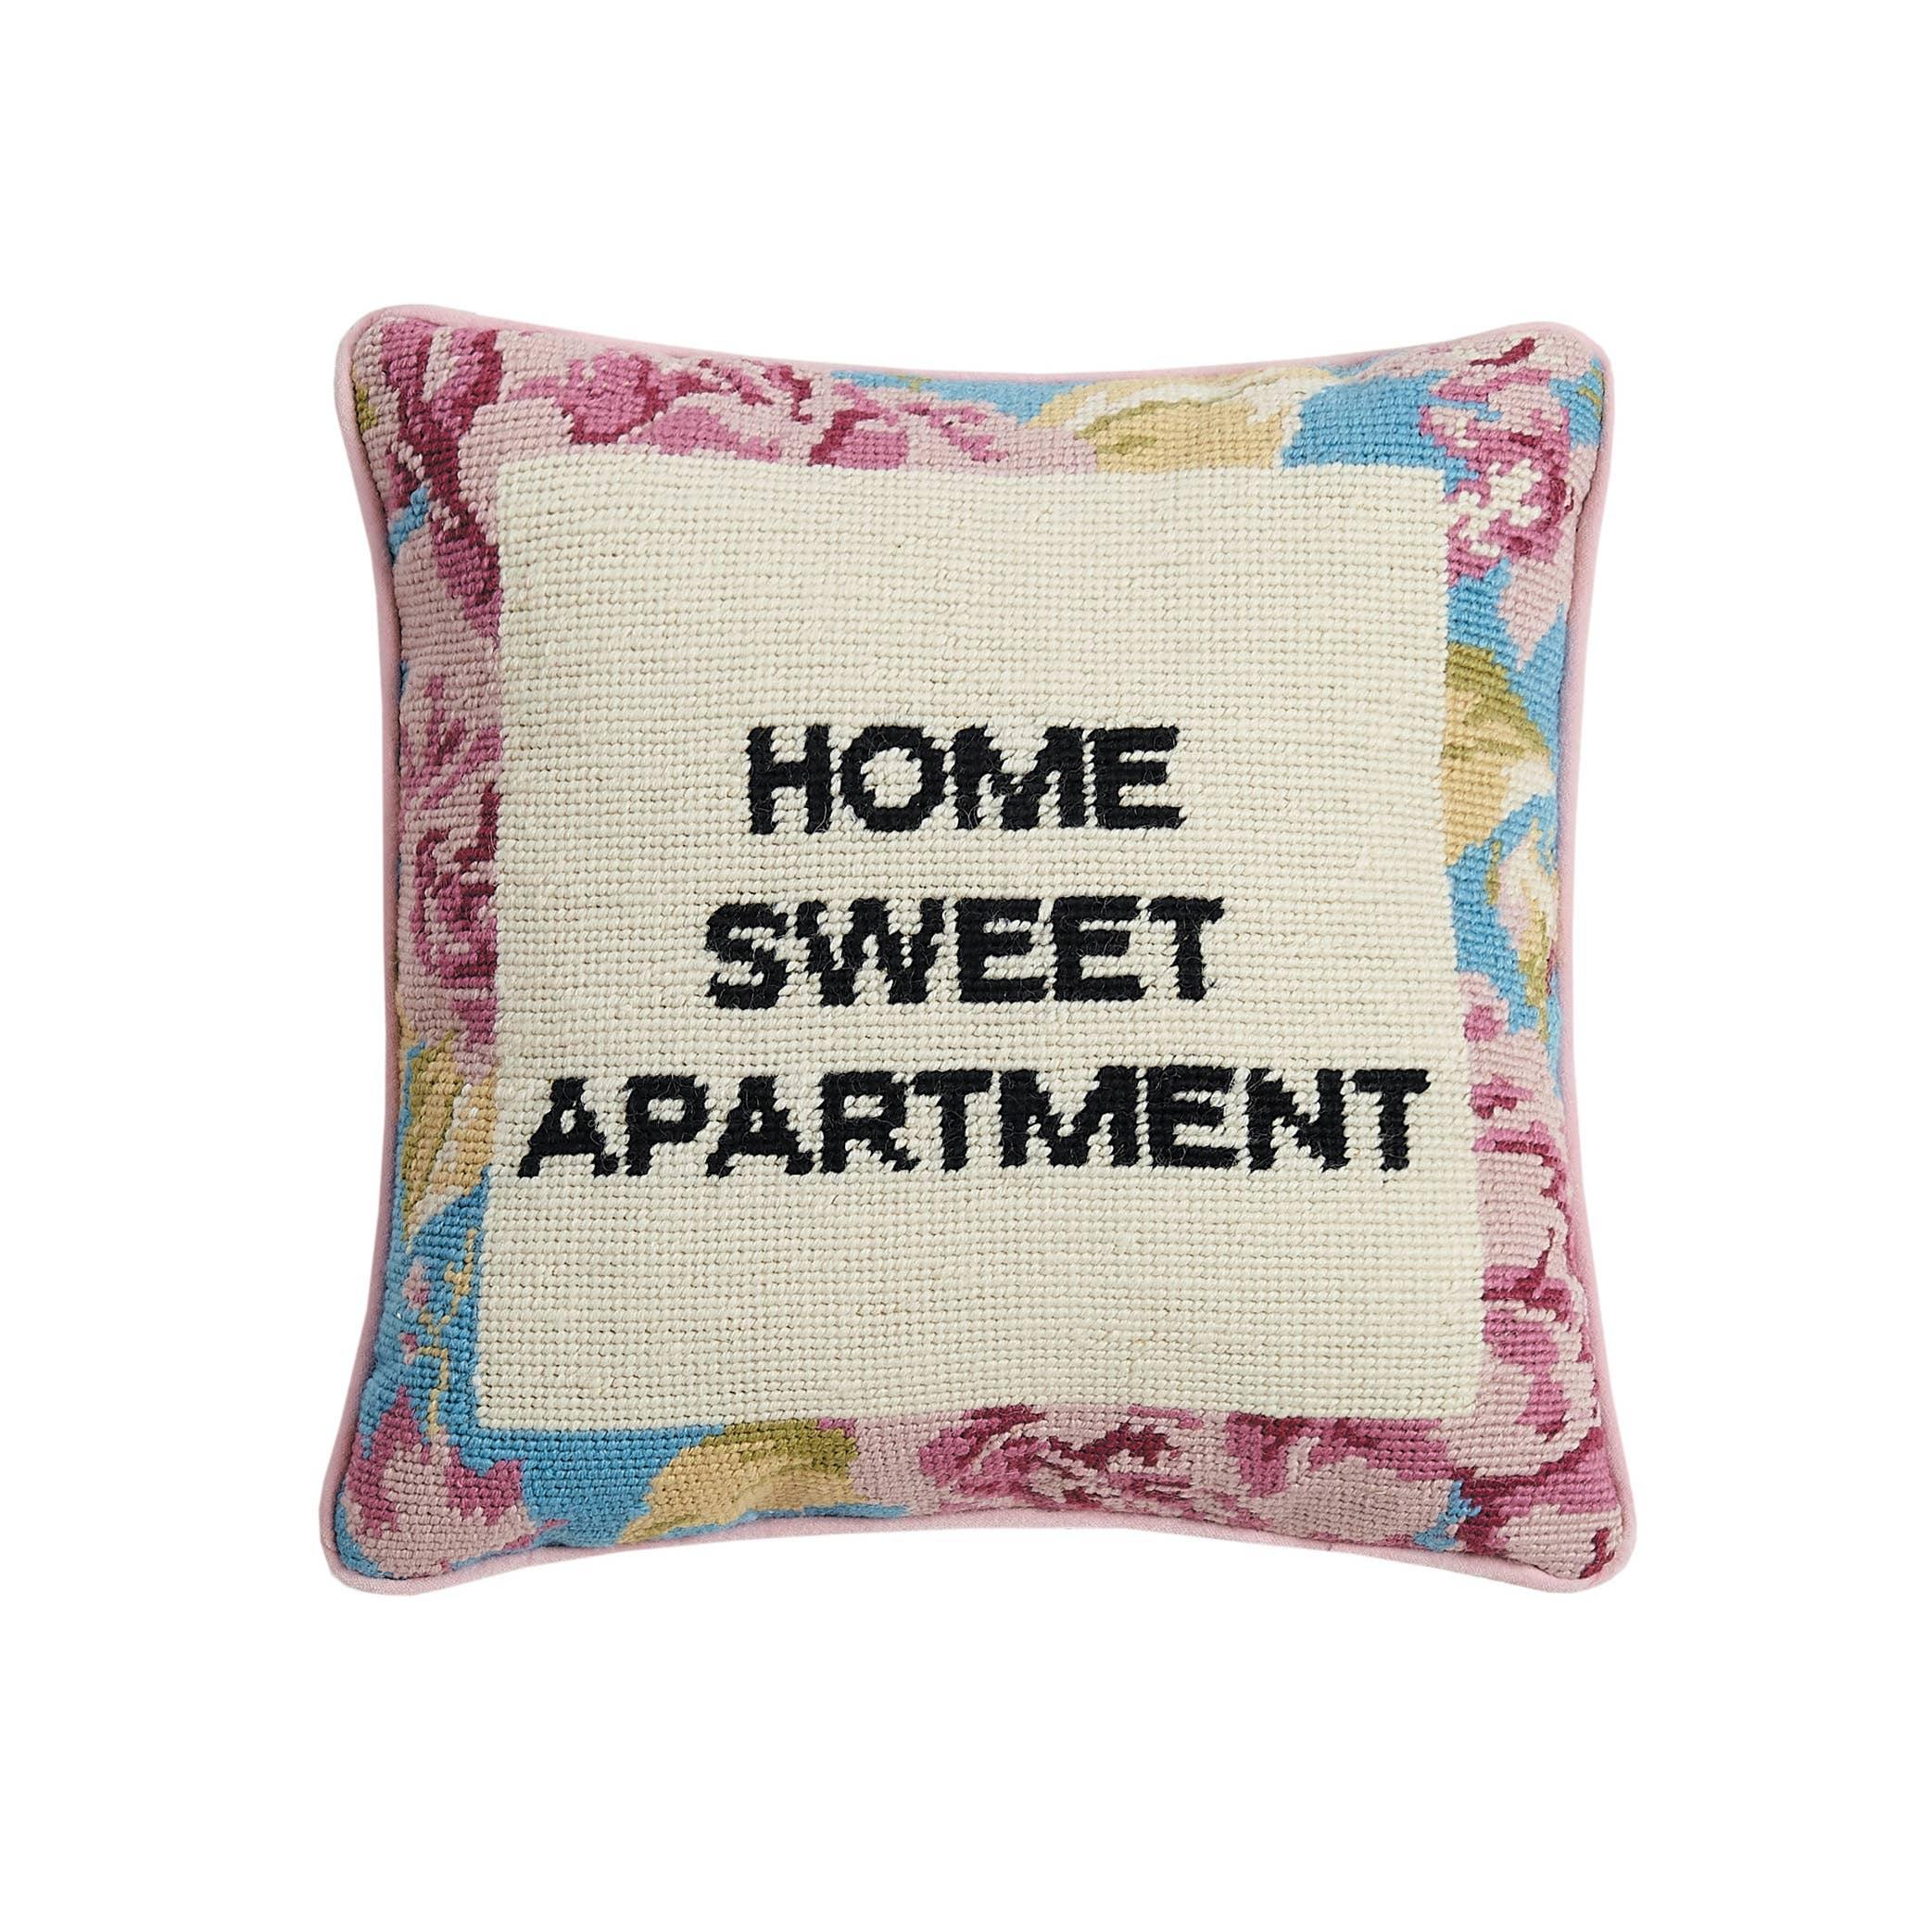 Home Sweet Apartment Needlepoint Pillow - DIGS